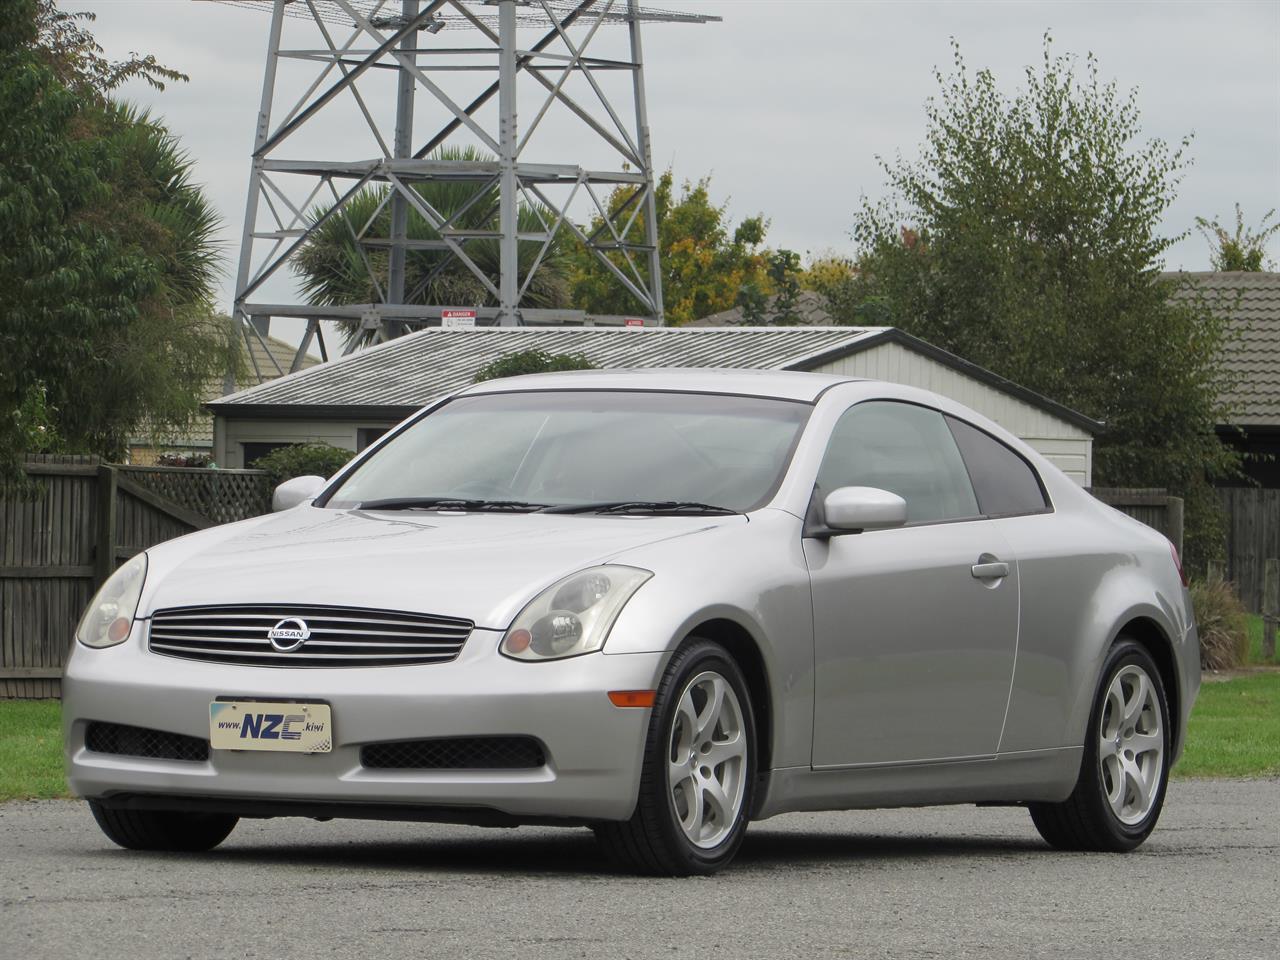 2005 Nissan SKYLINE only $63 weekly